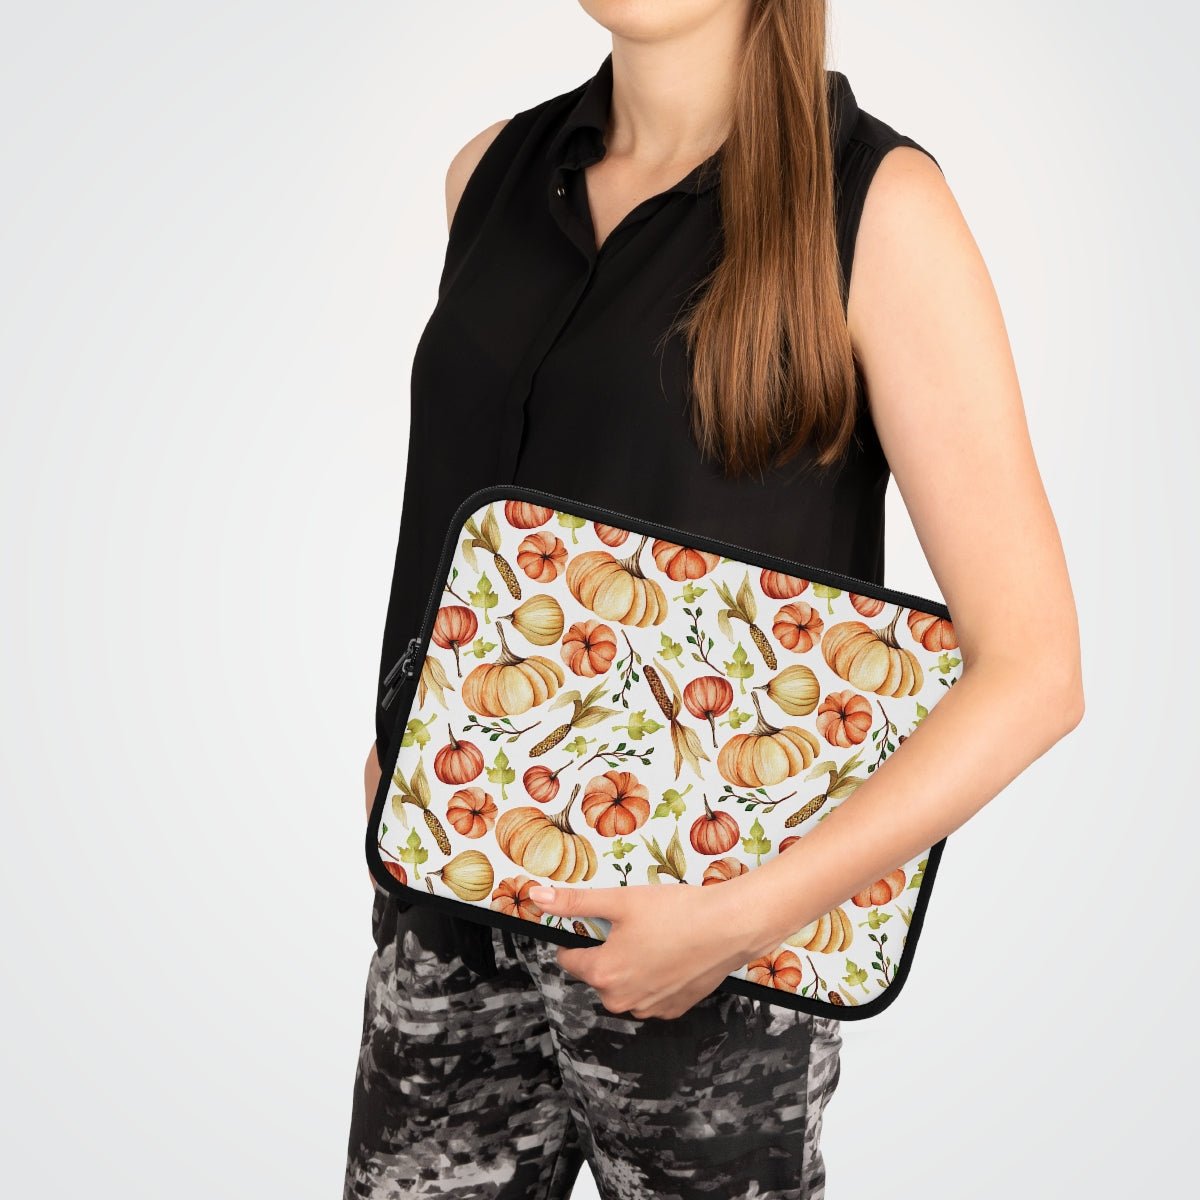 Fall Pumpkins and Corn Laptop Sleeve - Puffin Lime